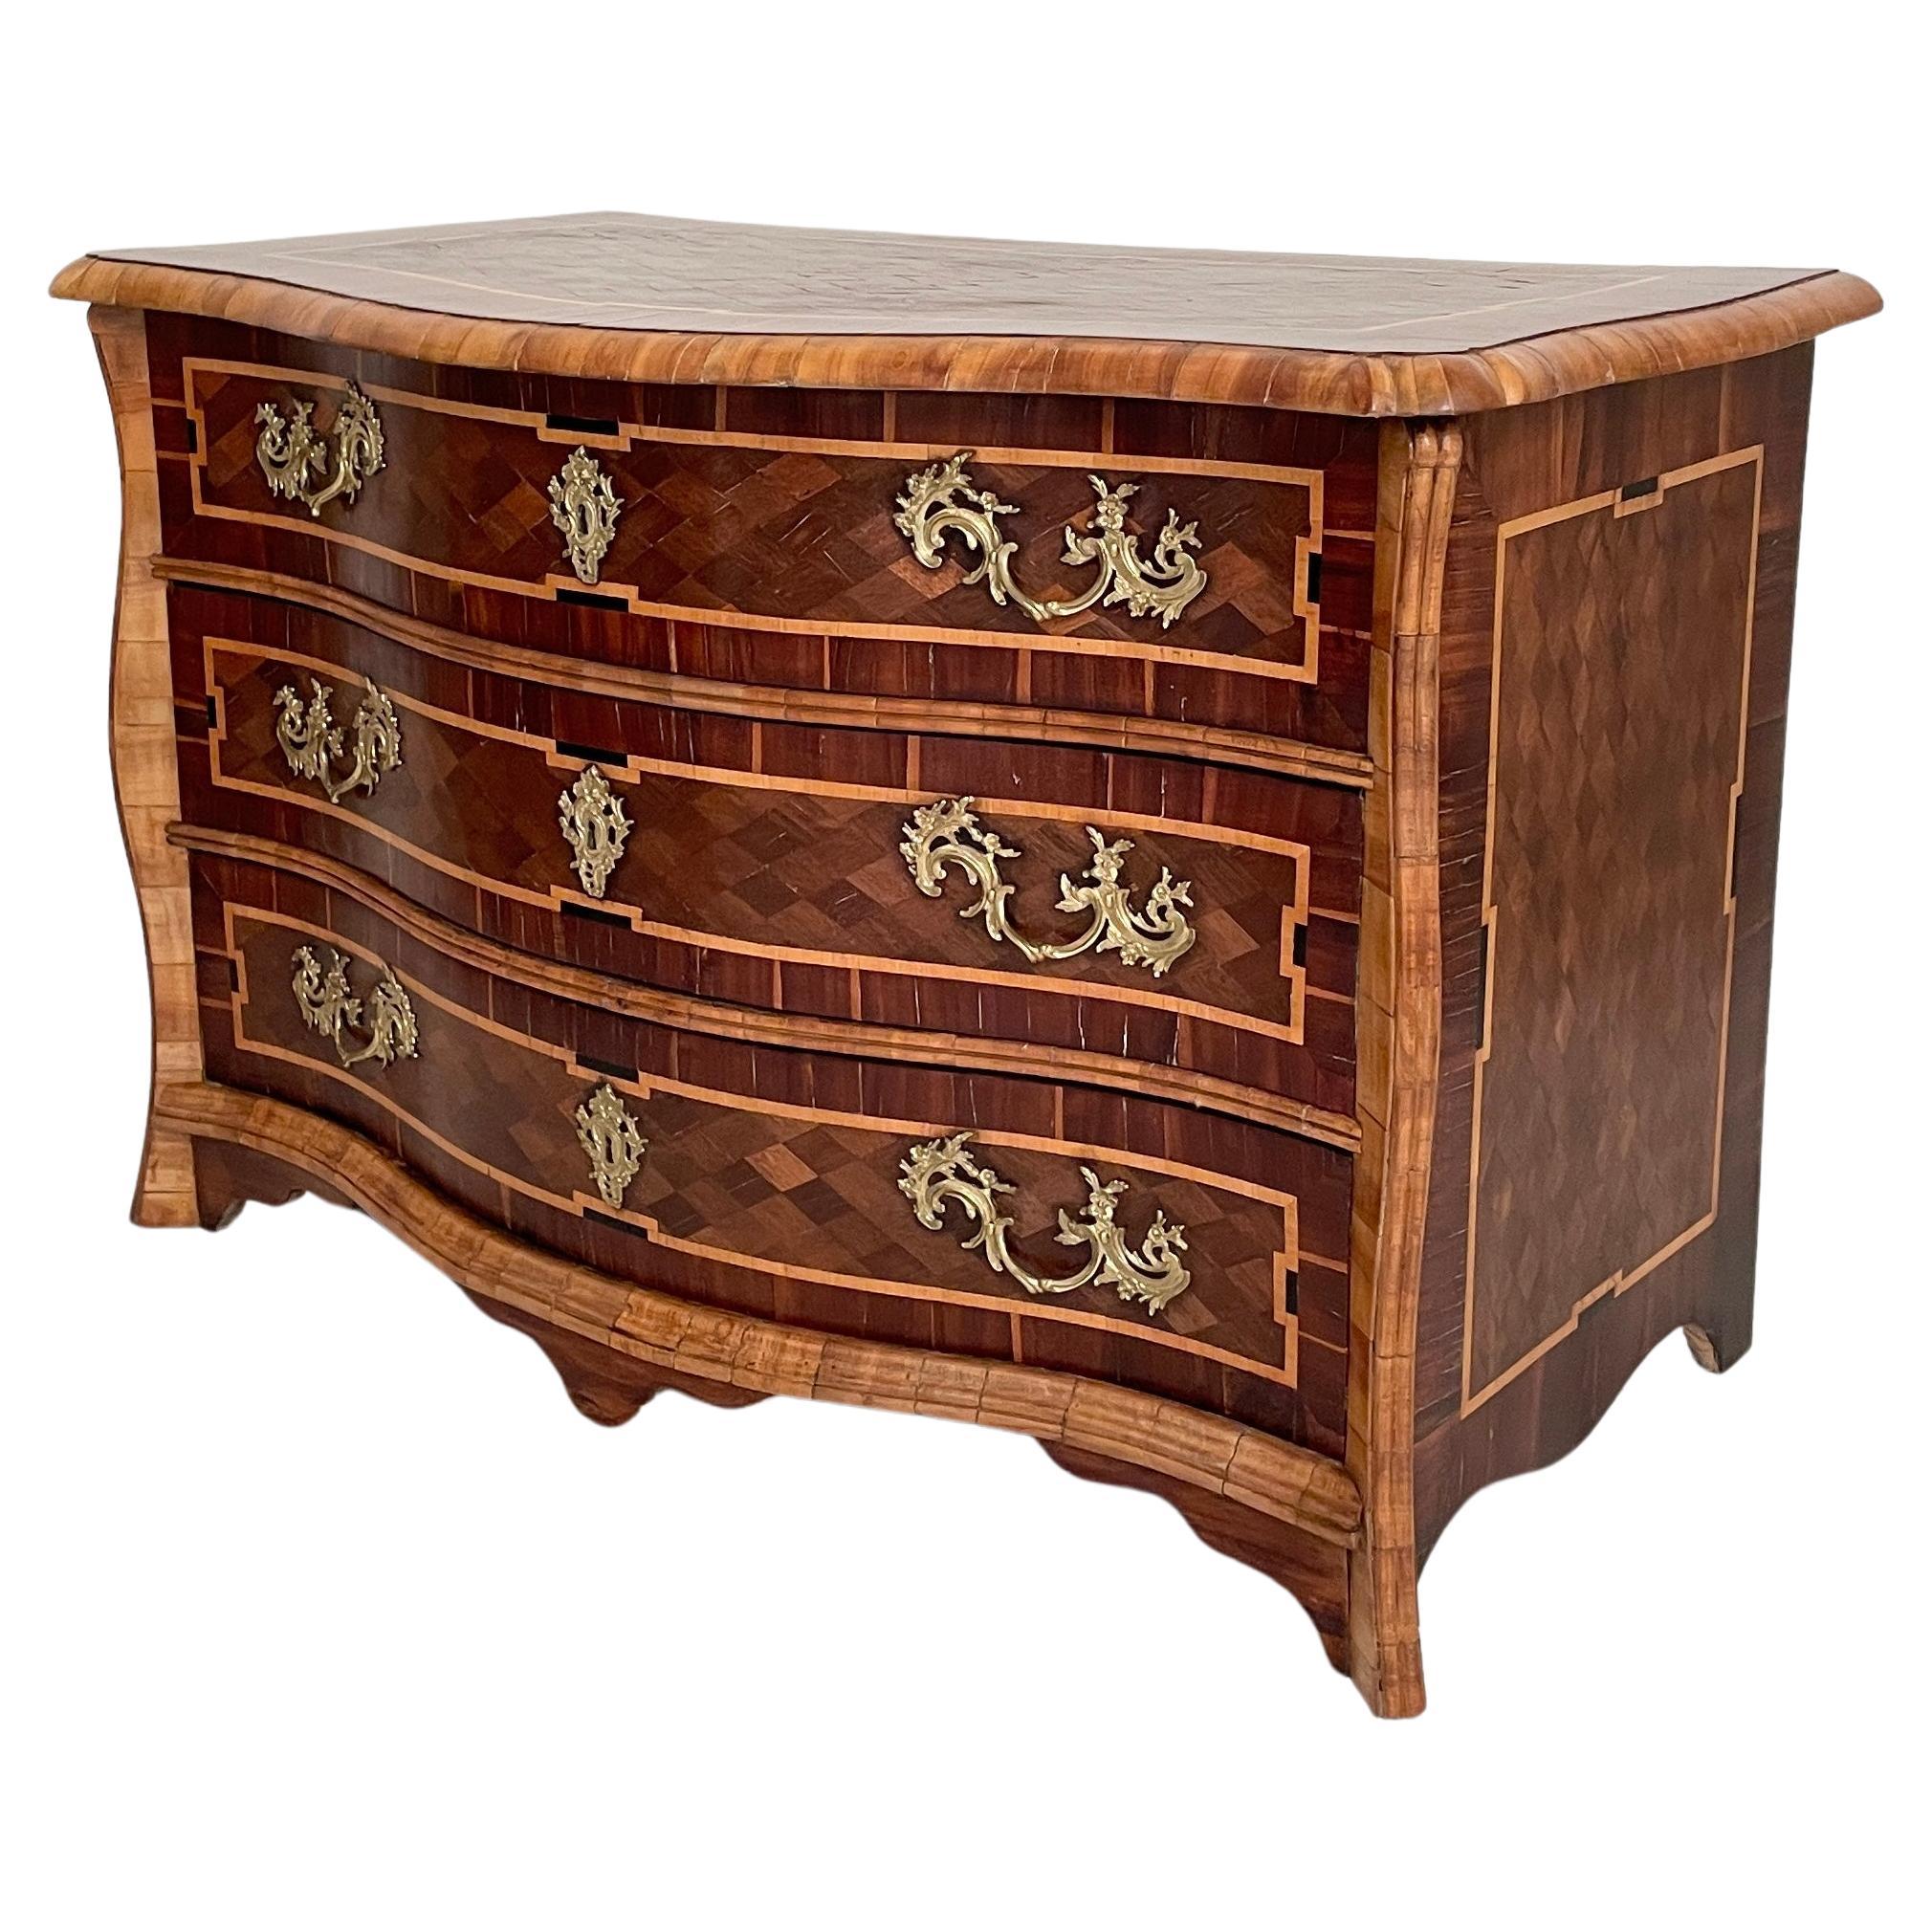 18th Century Dresdner Baroque Commode in Brown Walnut and Amaranth, Around 1760